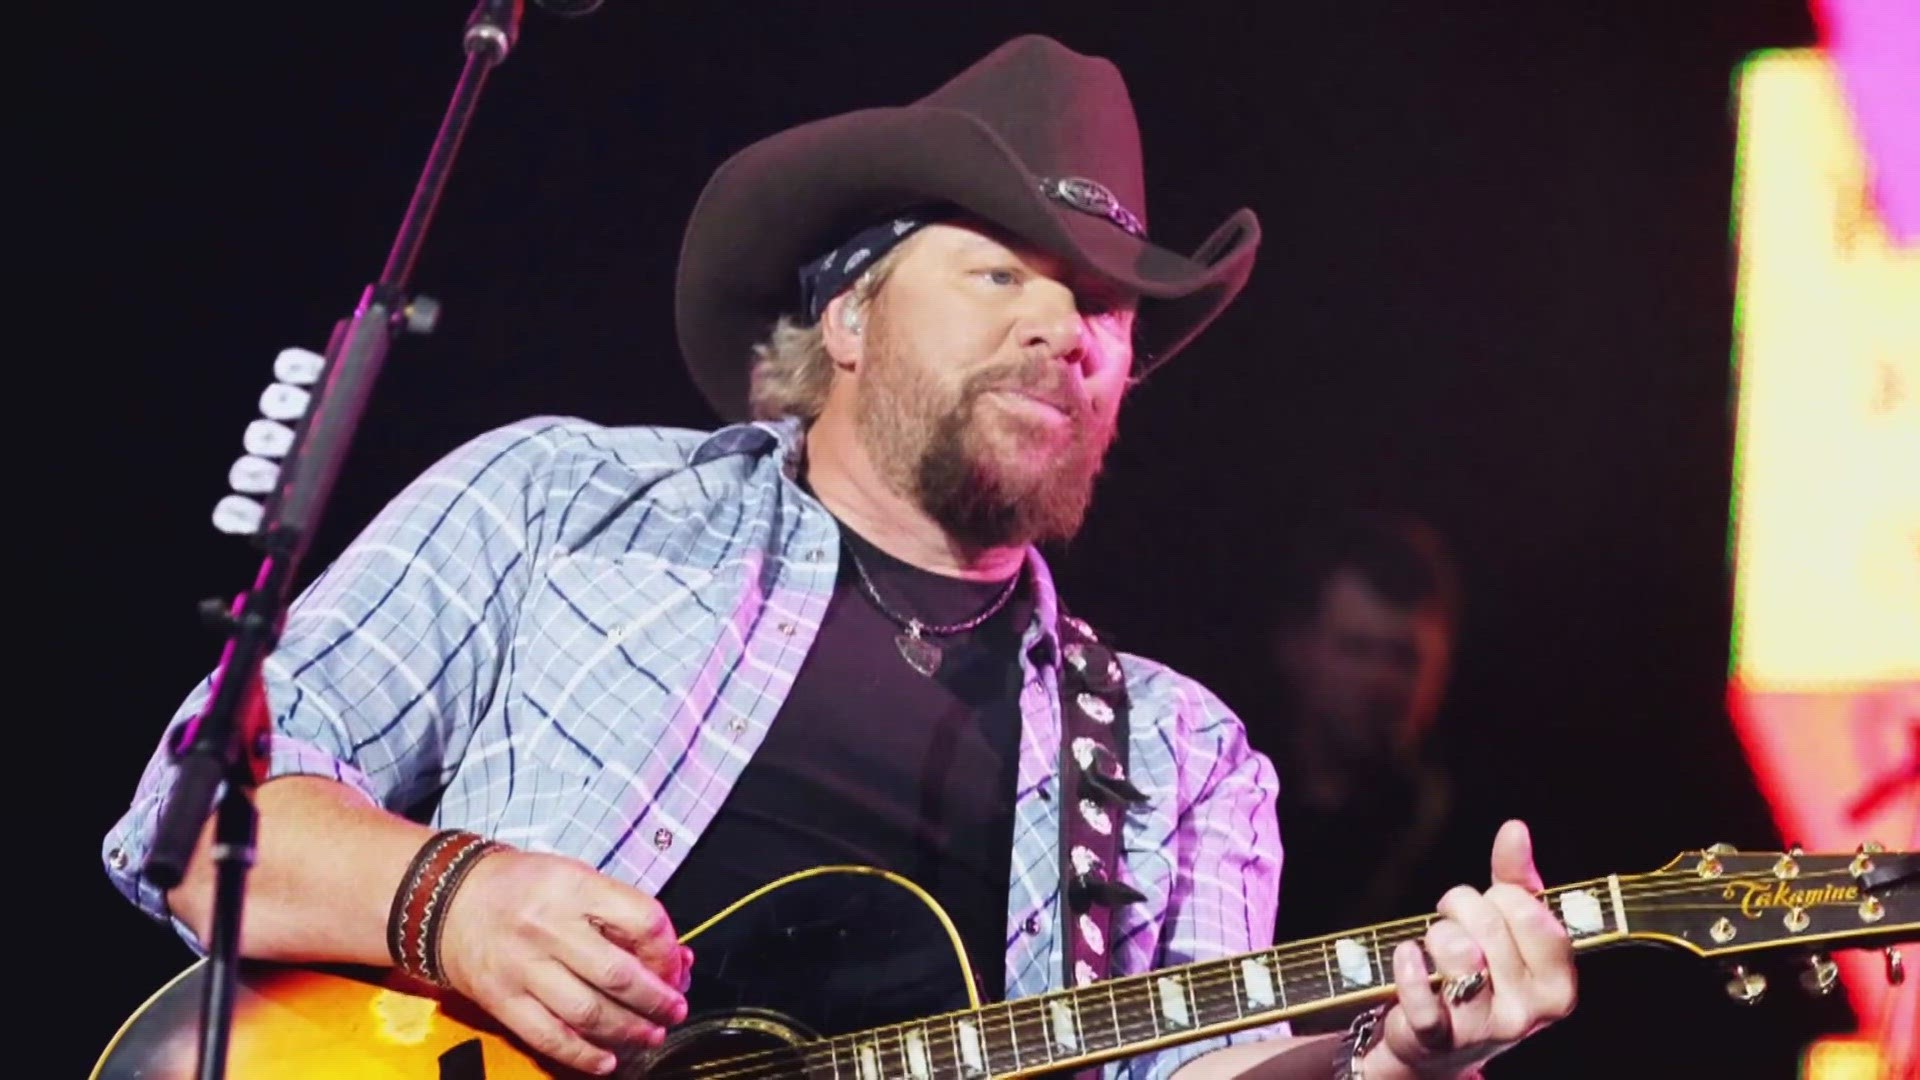 Toby Keith, a hit country crafter of pro-American anthems who both riled up critics and was loved by millions of fans, has died. He was 62.